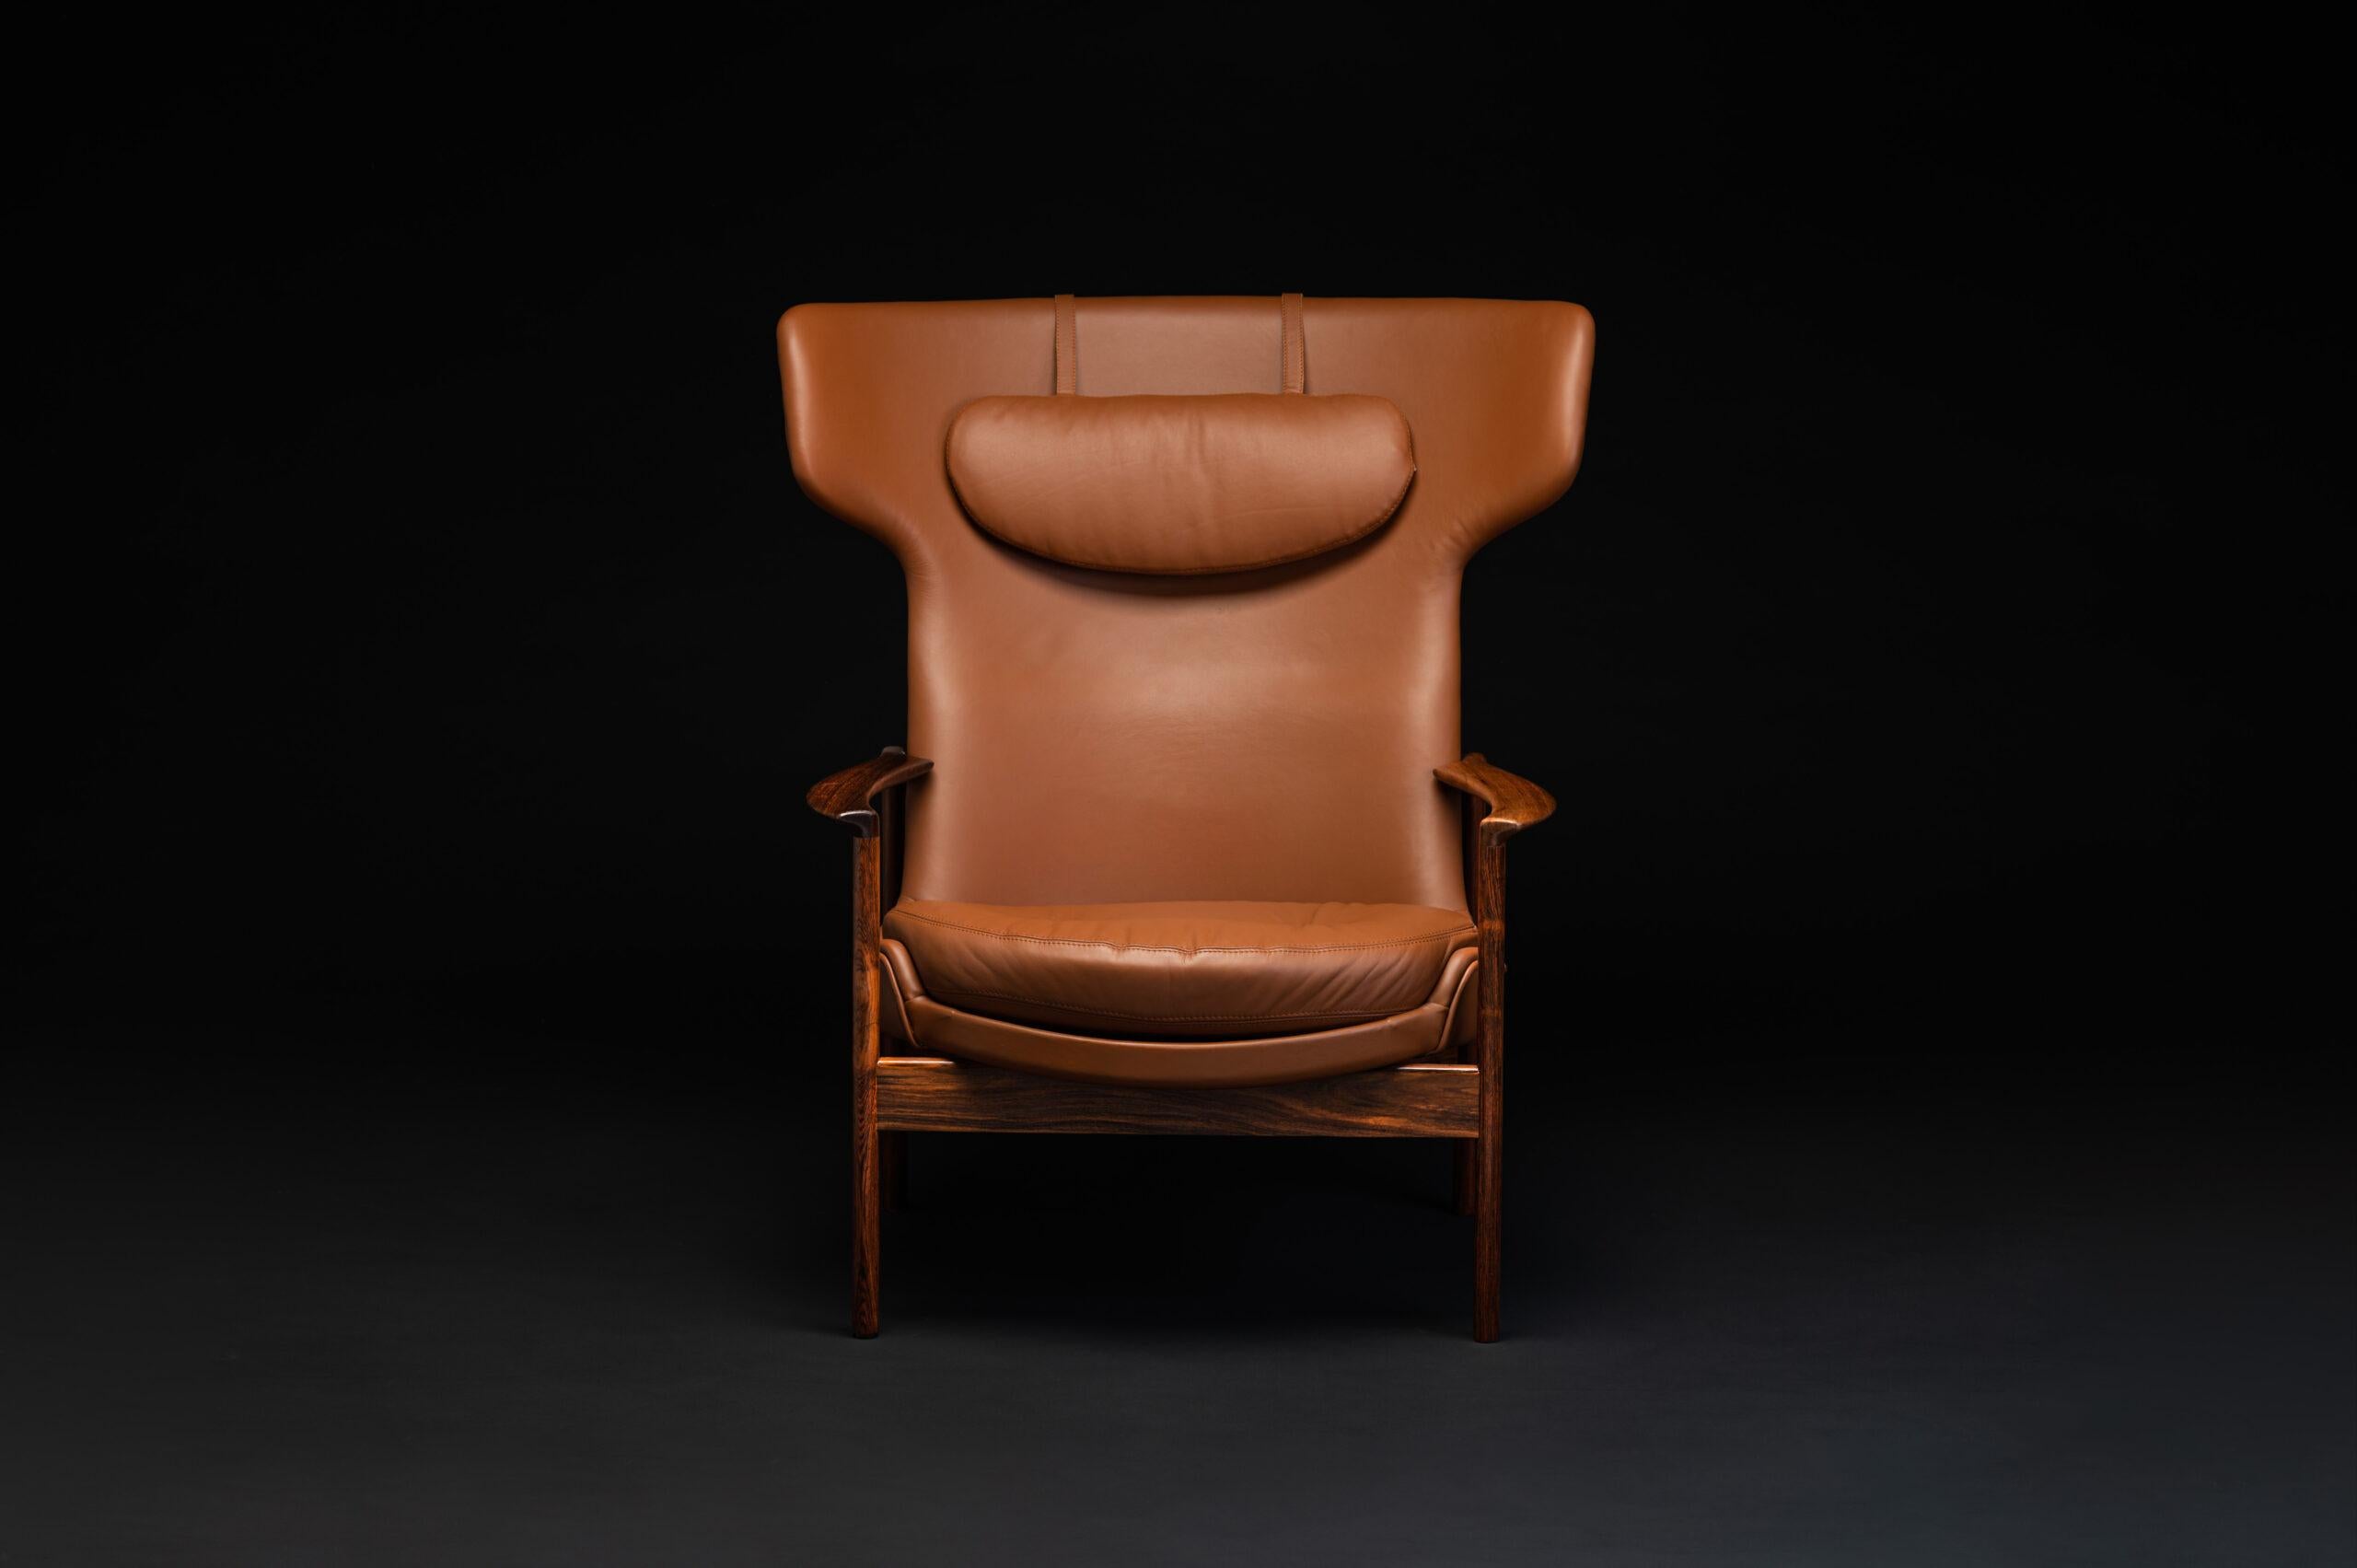 Wingback lounge chair designed by Ib Kofod Larsen in 1974 for Fröscher KG in Germany. The rosewood frame is beautifully detailed and fully restored. The leather and filling have been completely renewed in high-quality cognac brown semi-aniline